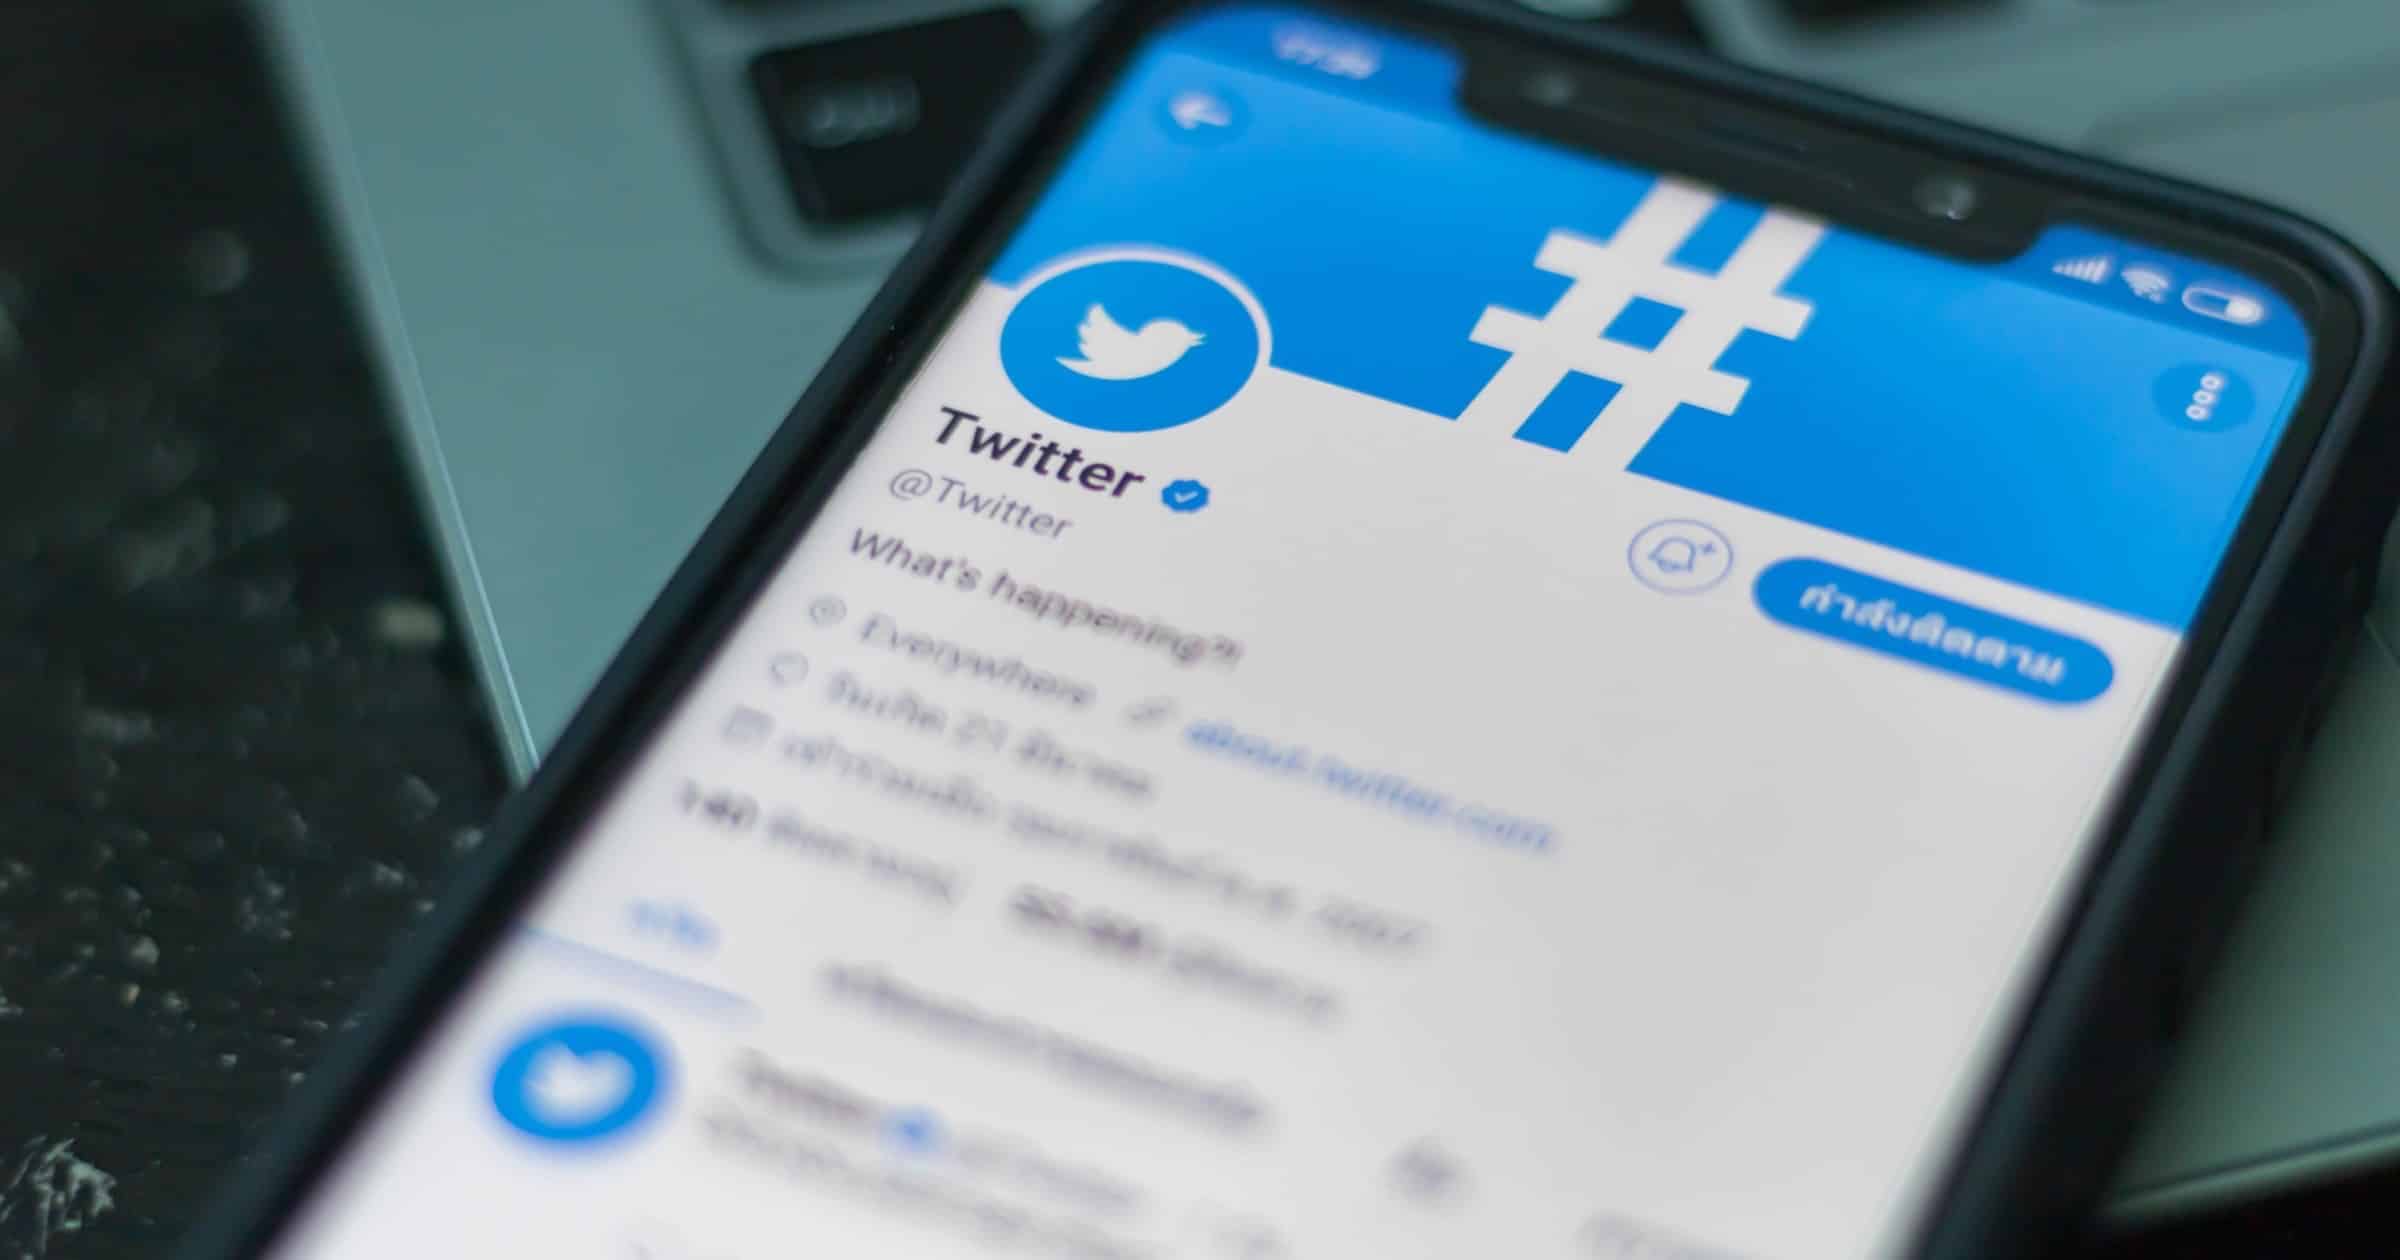 This Judge Wants Platforms like Twitter to be Treated as Utilities